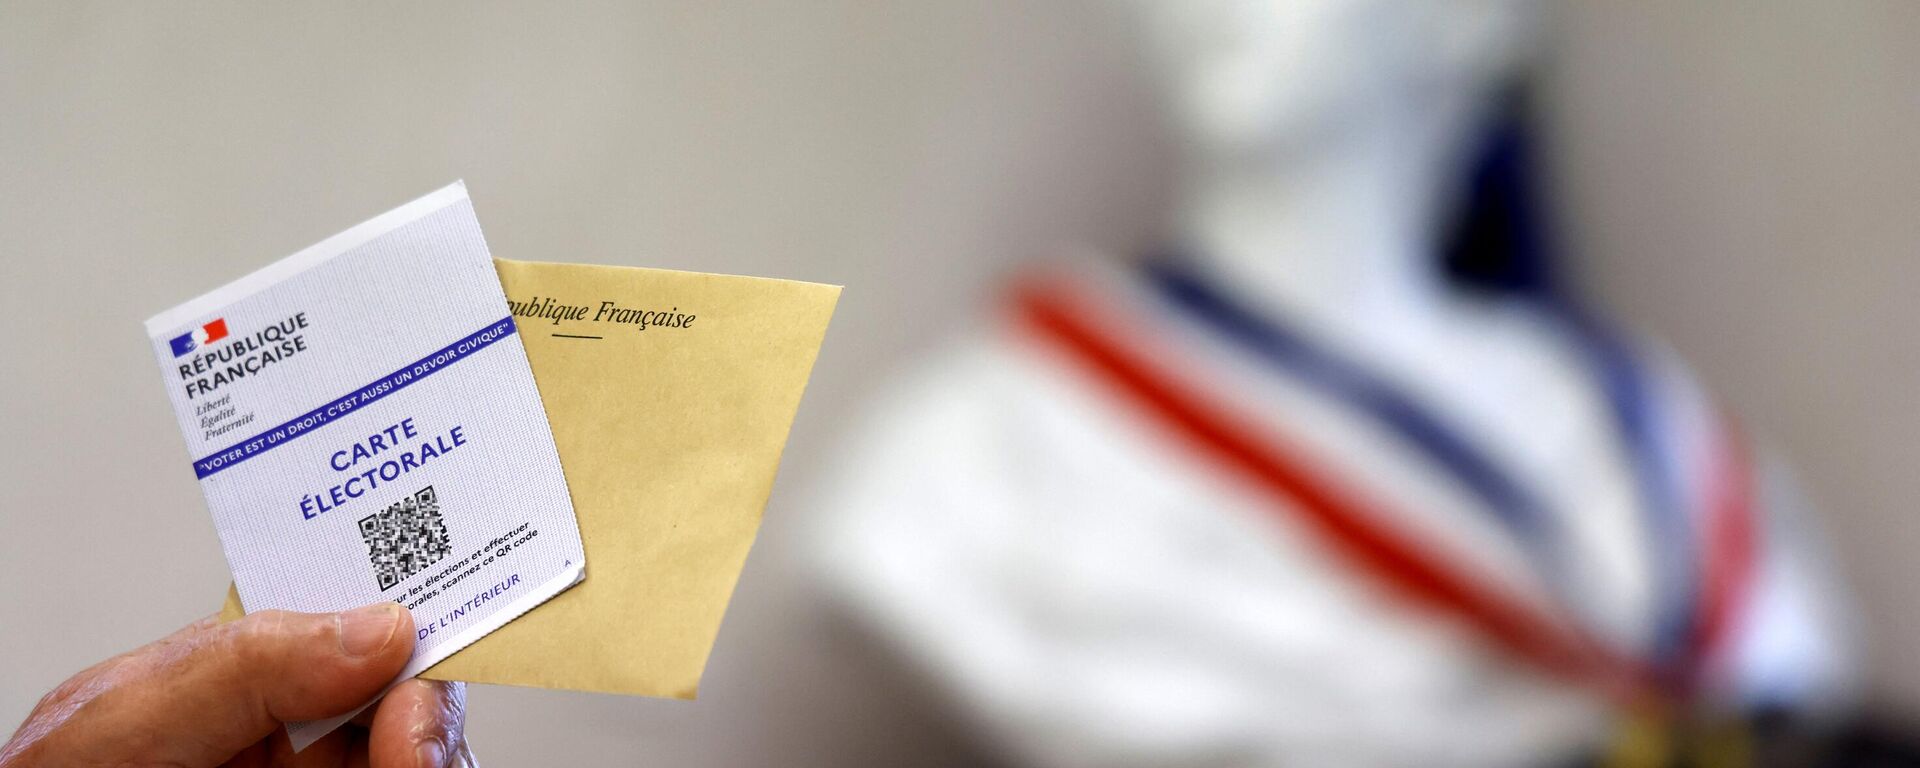 A voter holds a ballot paper during the second stage of French parliamentary elections at a polling station the mayoral offices of Etables, near Le Touquet, northern France on June 19, 2022 - Sputnik International, 1920, 19.06.2022